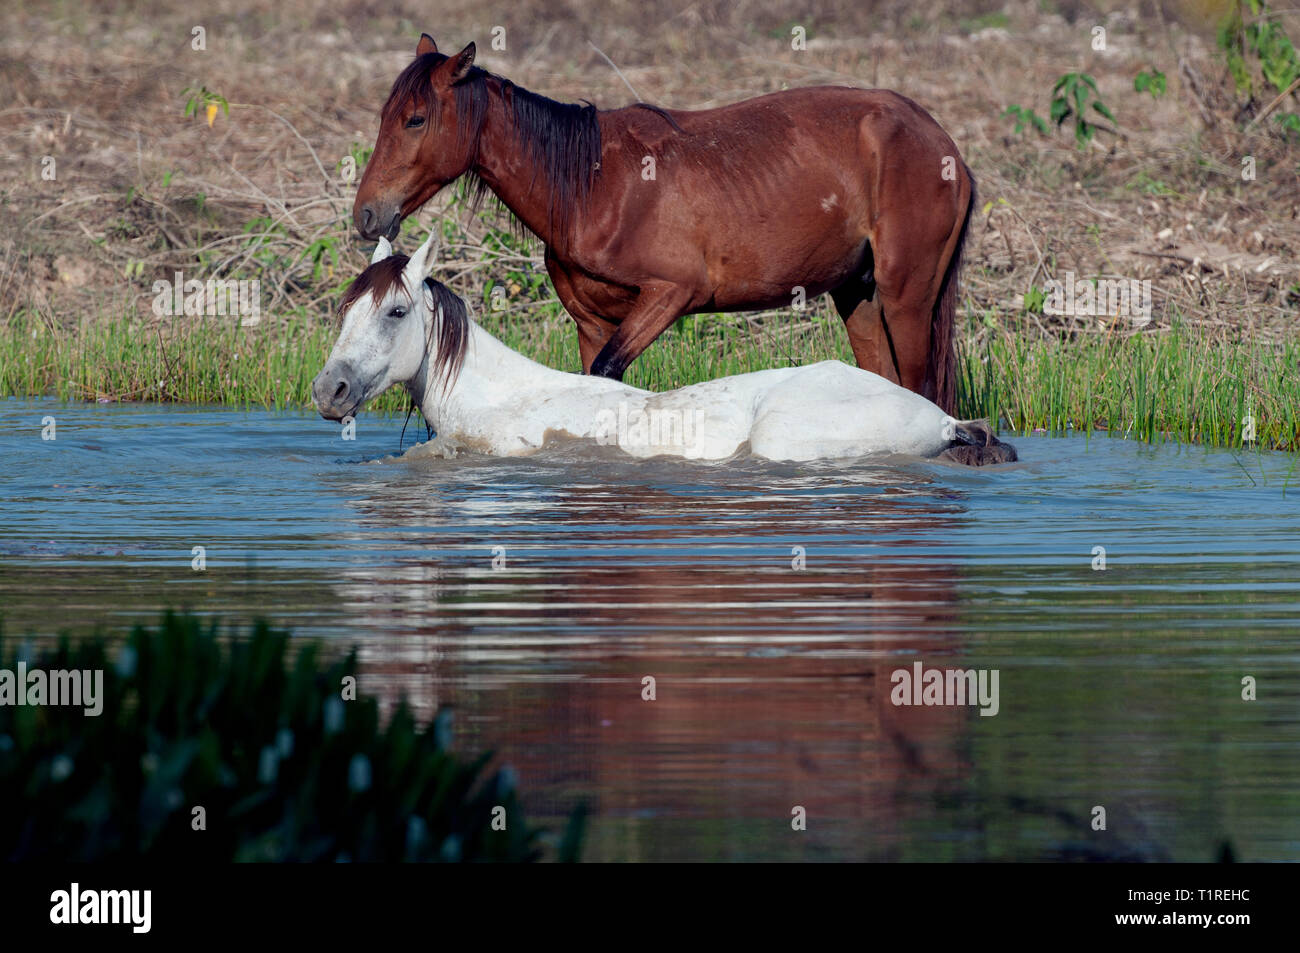 Two horses in a pond in The Pantanal in Brazil Stock Photo